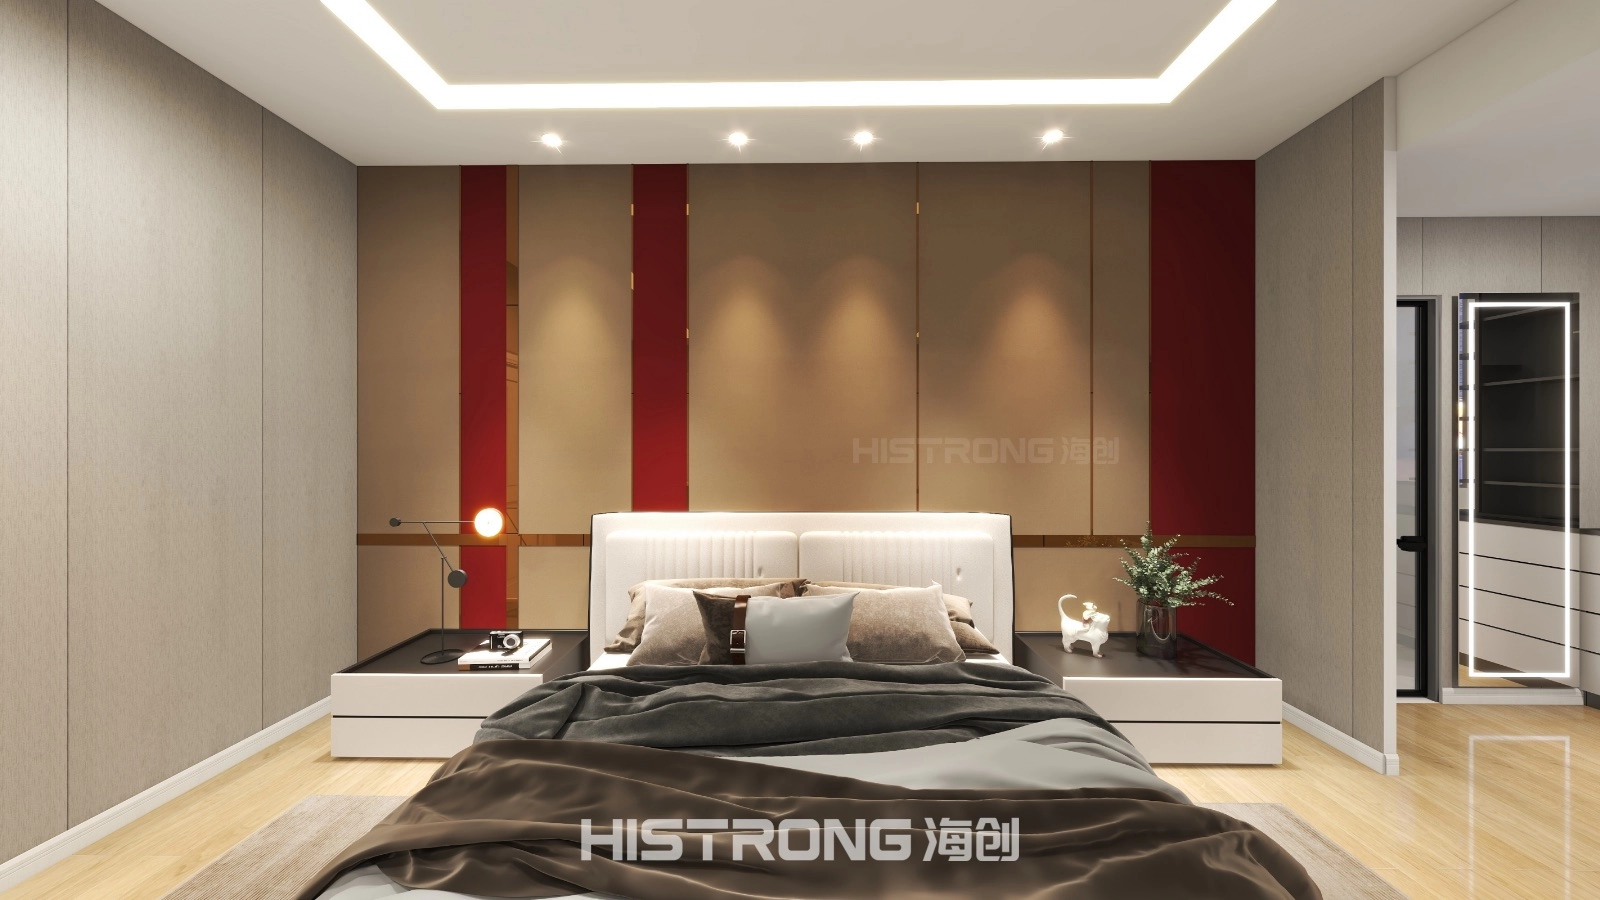 Bedroom, Bedhead Feature Wall, Bamboo Fibre Panel Feature Wall, Aluminium Inlay, Cabinetry, Bedroom Feature Wall, Red Wall